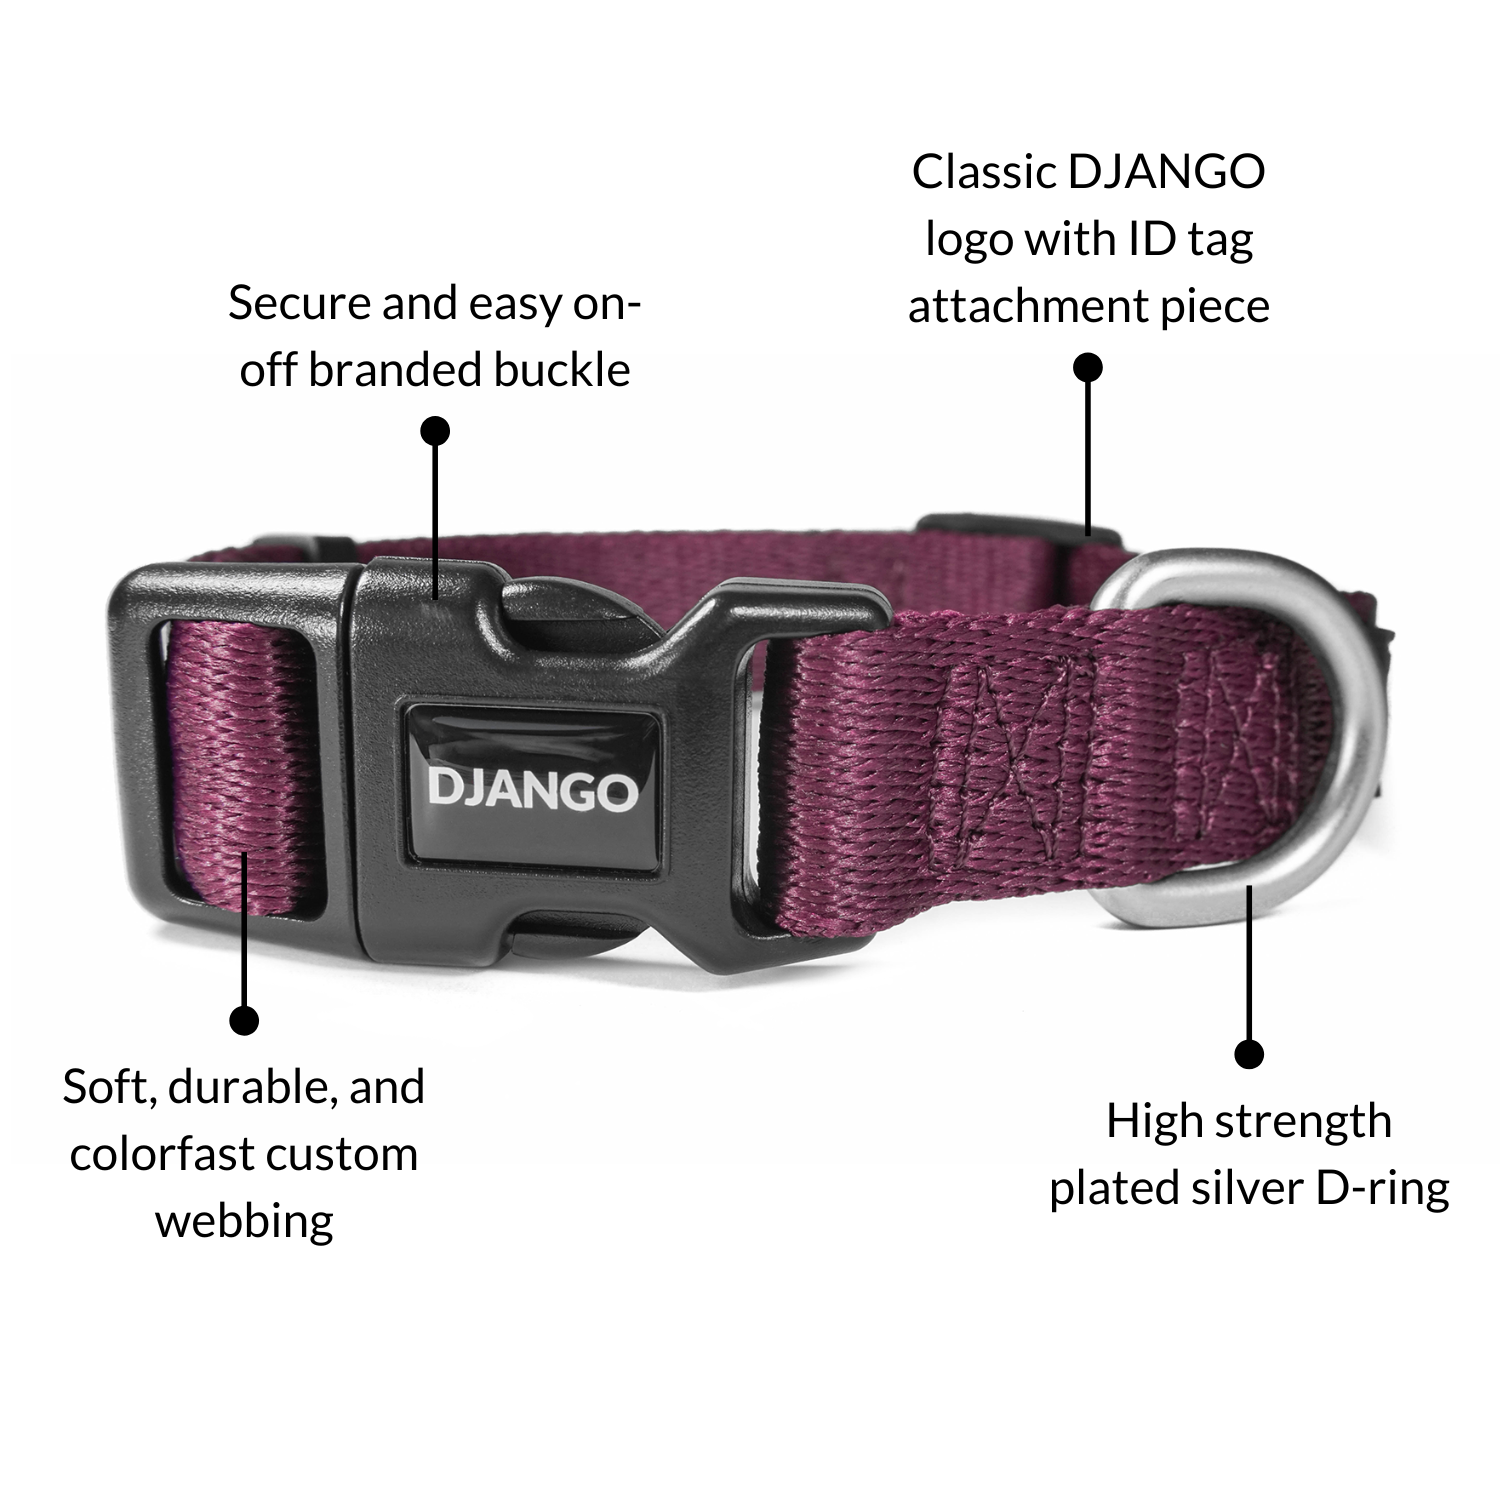 DJANGO Tahoe Dog Collar in Raspberry Purple - Key features include soft and durable custom webbing, a heavy duty plated silver D-ring, a secure and easy on-off side release buckle, and DJANGO's classic logo. - djangobrand.com